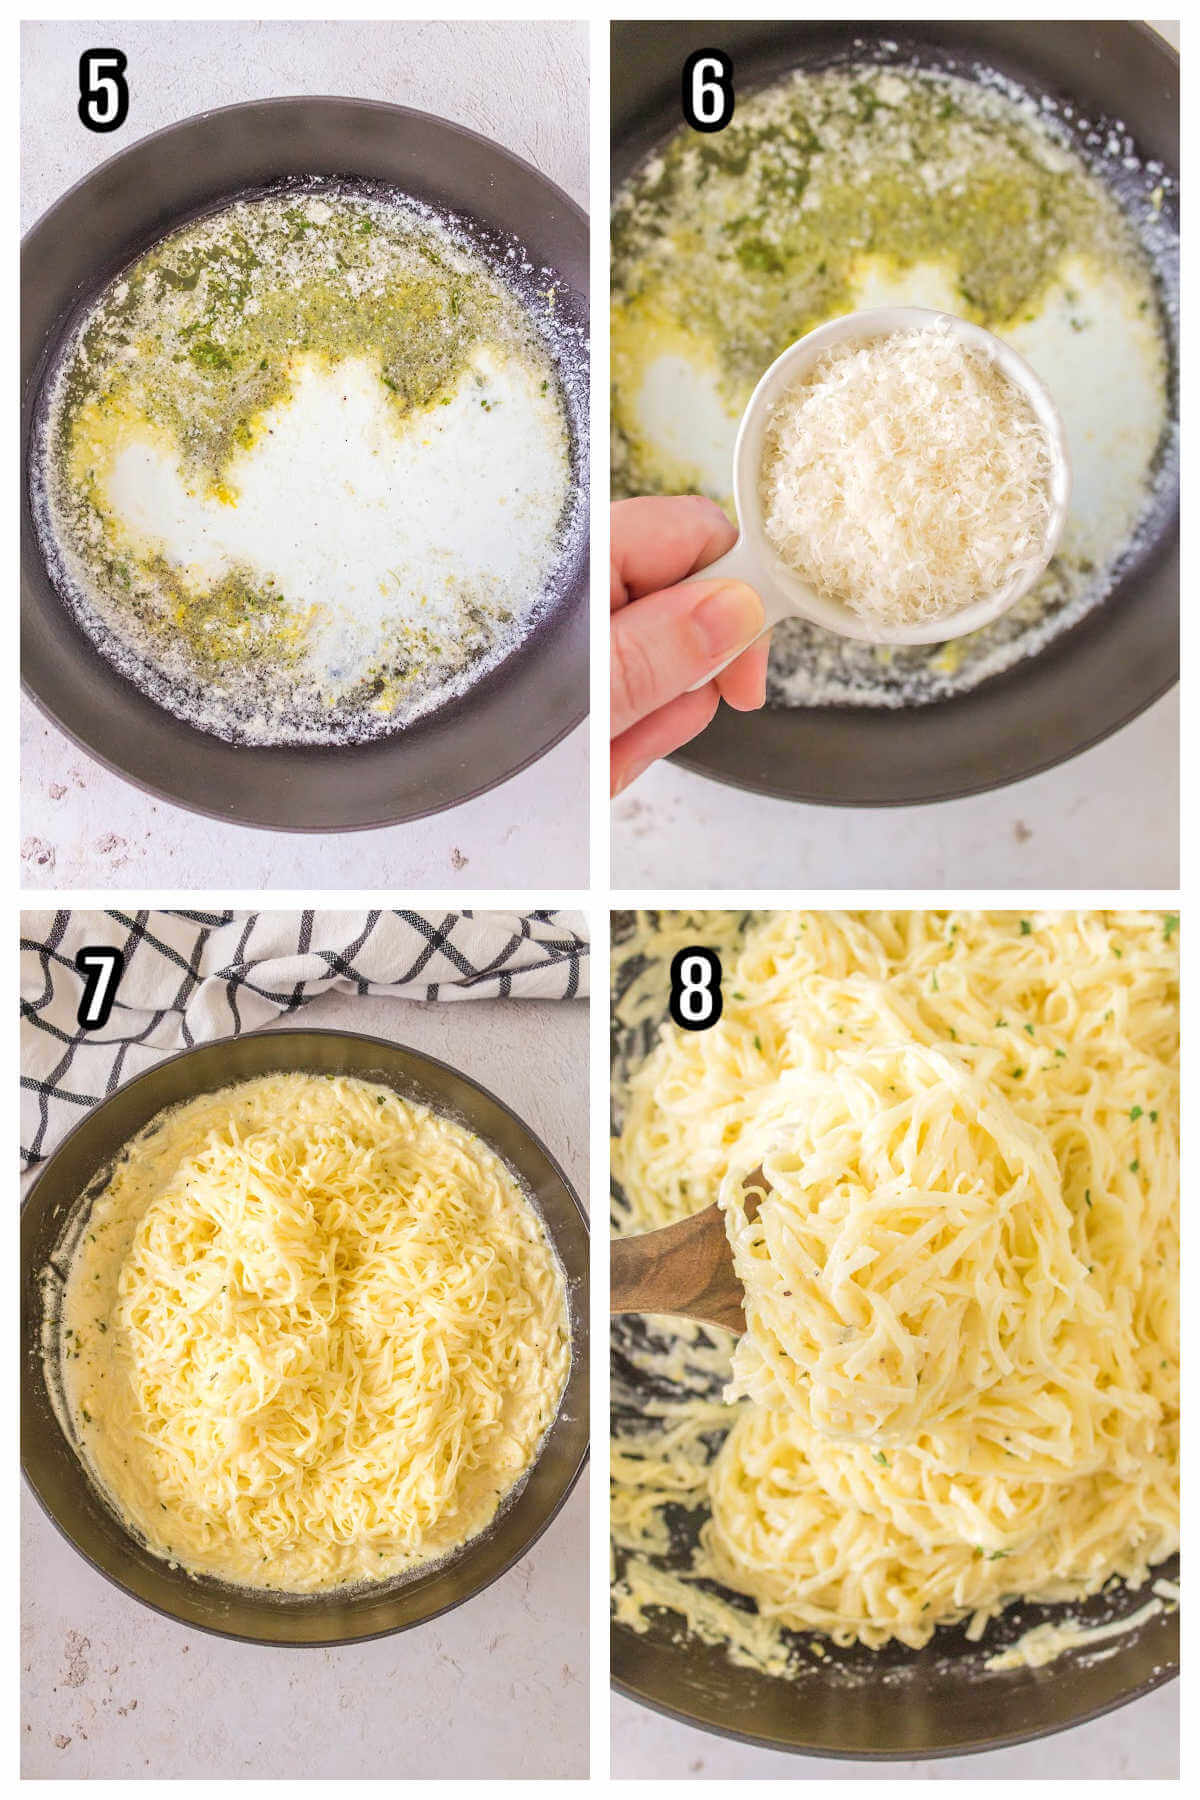 Second set of four steps to making and finishing the tagliolini al limone recipe. 